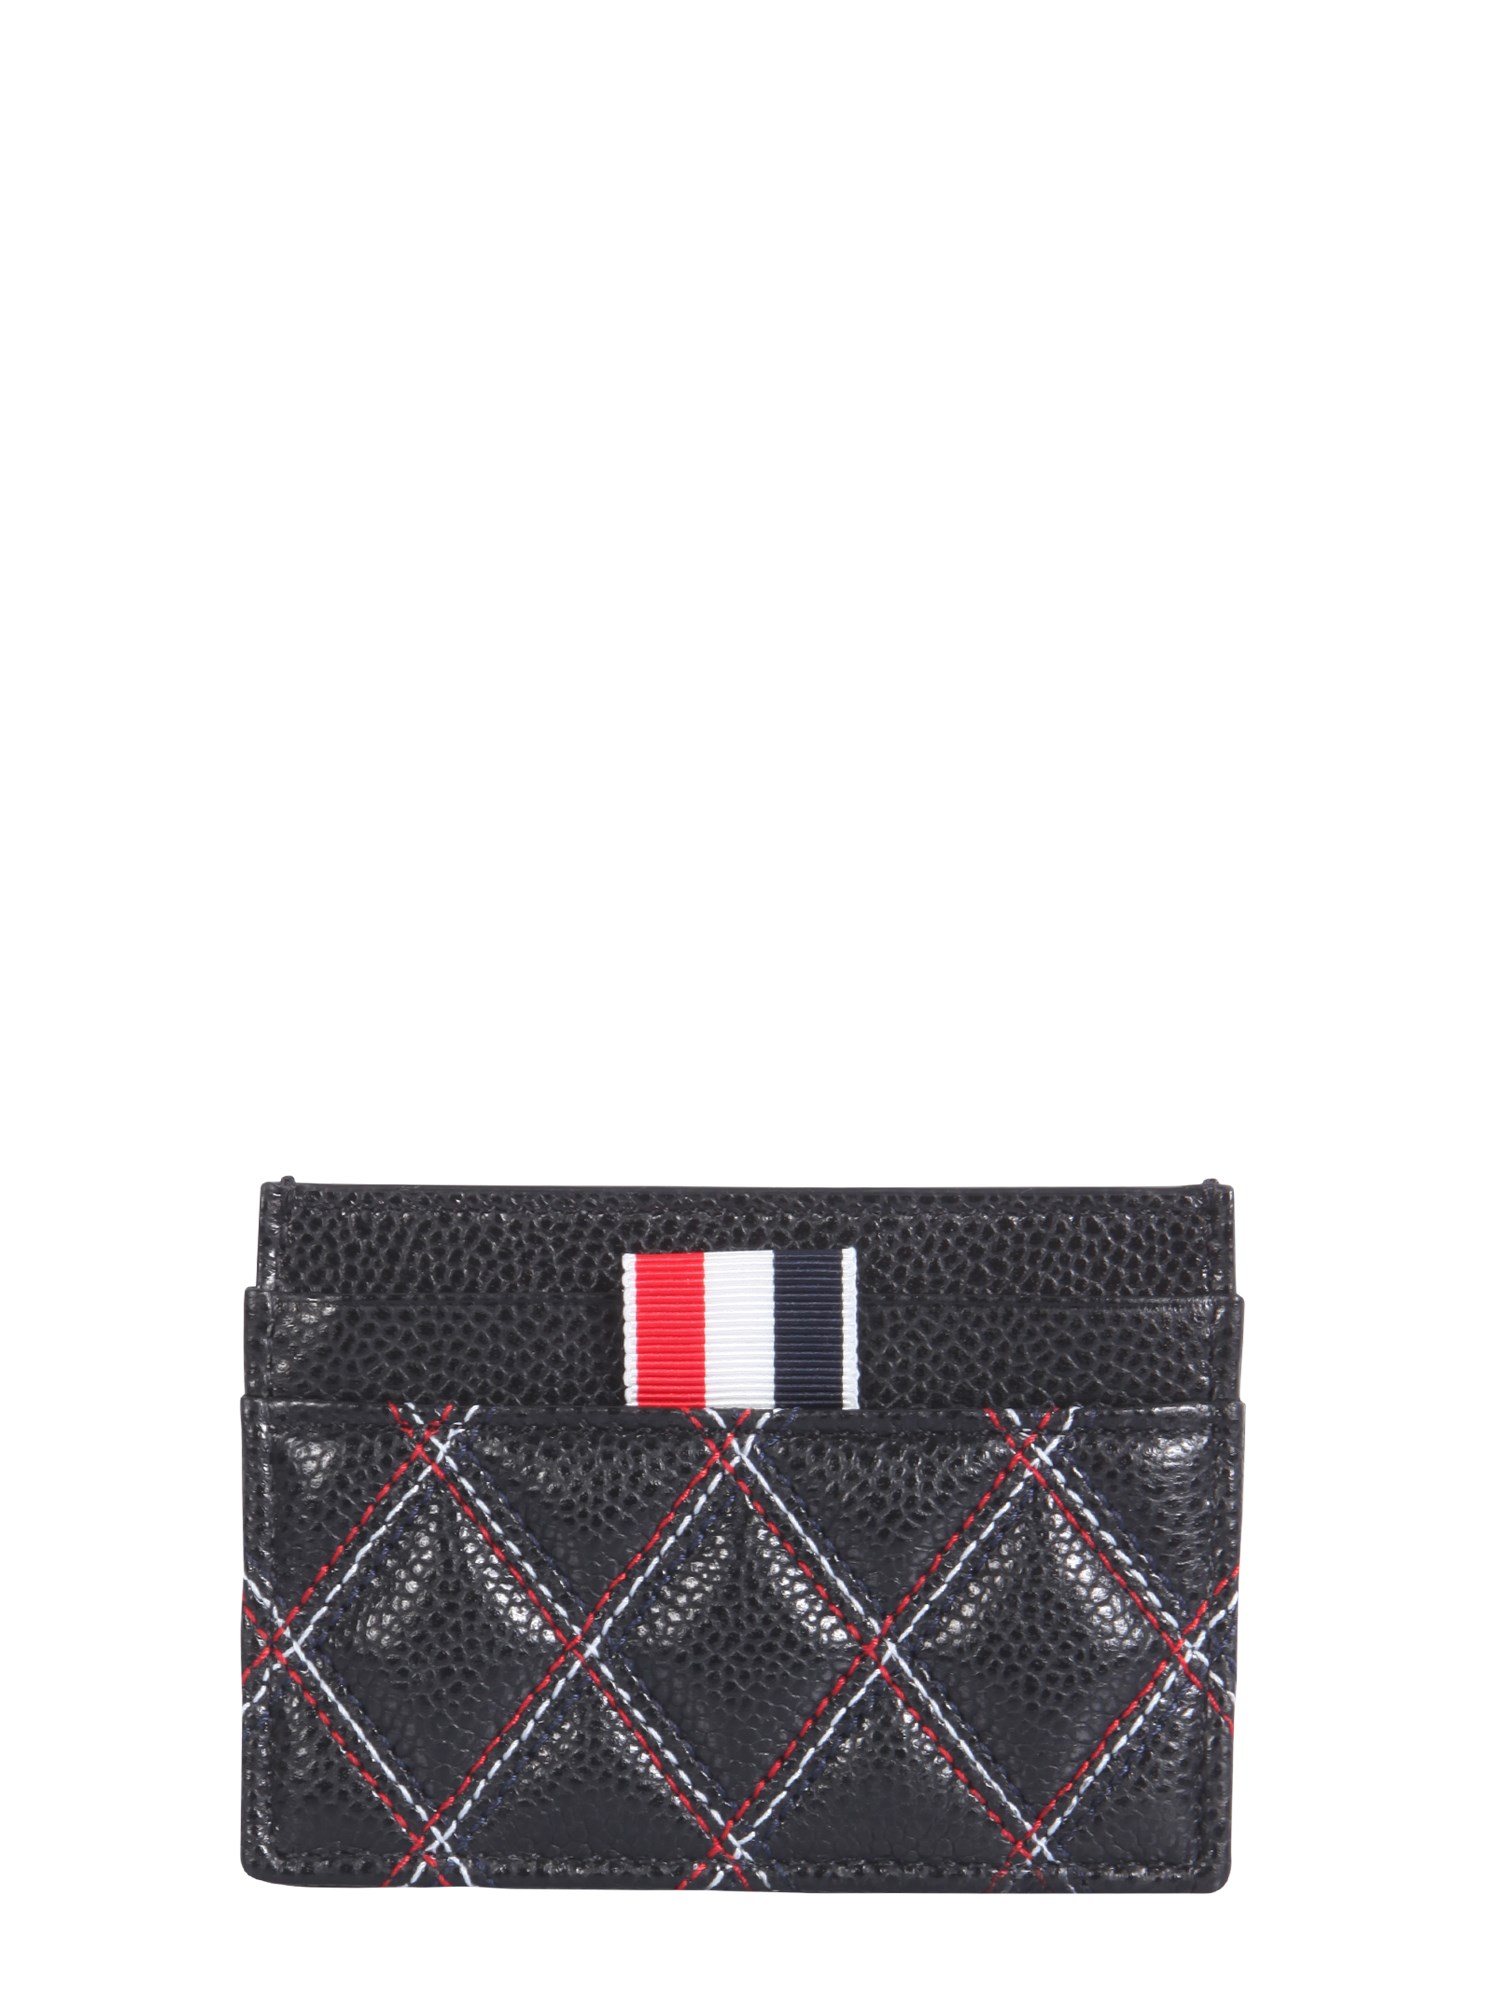 THOM BROWNE LEATHER CARD HOLDER,197954